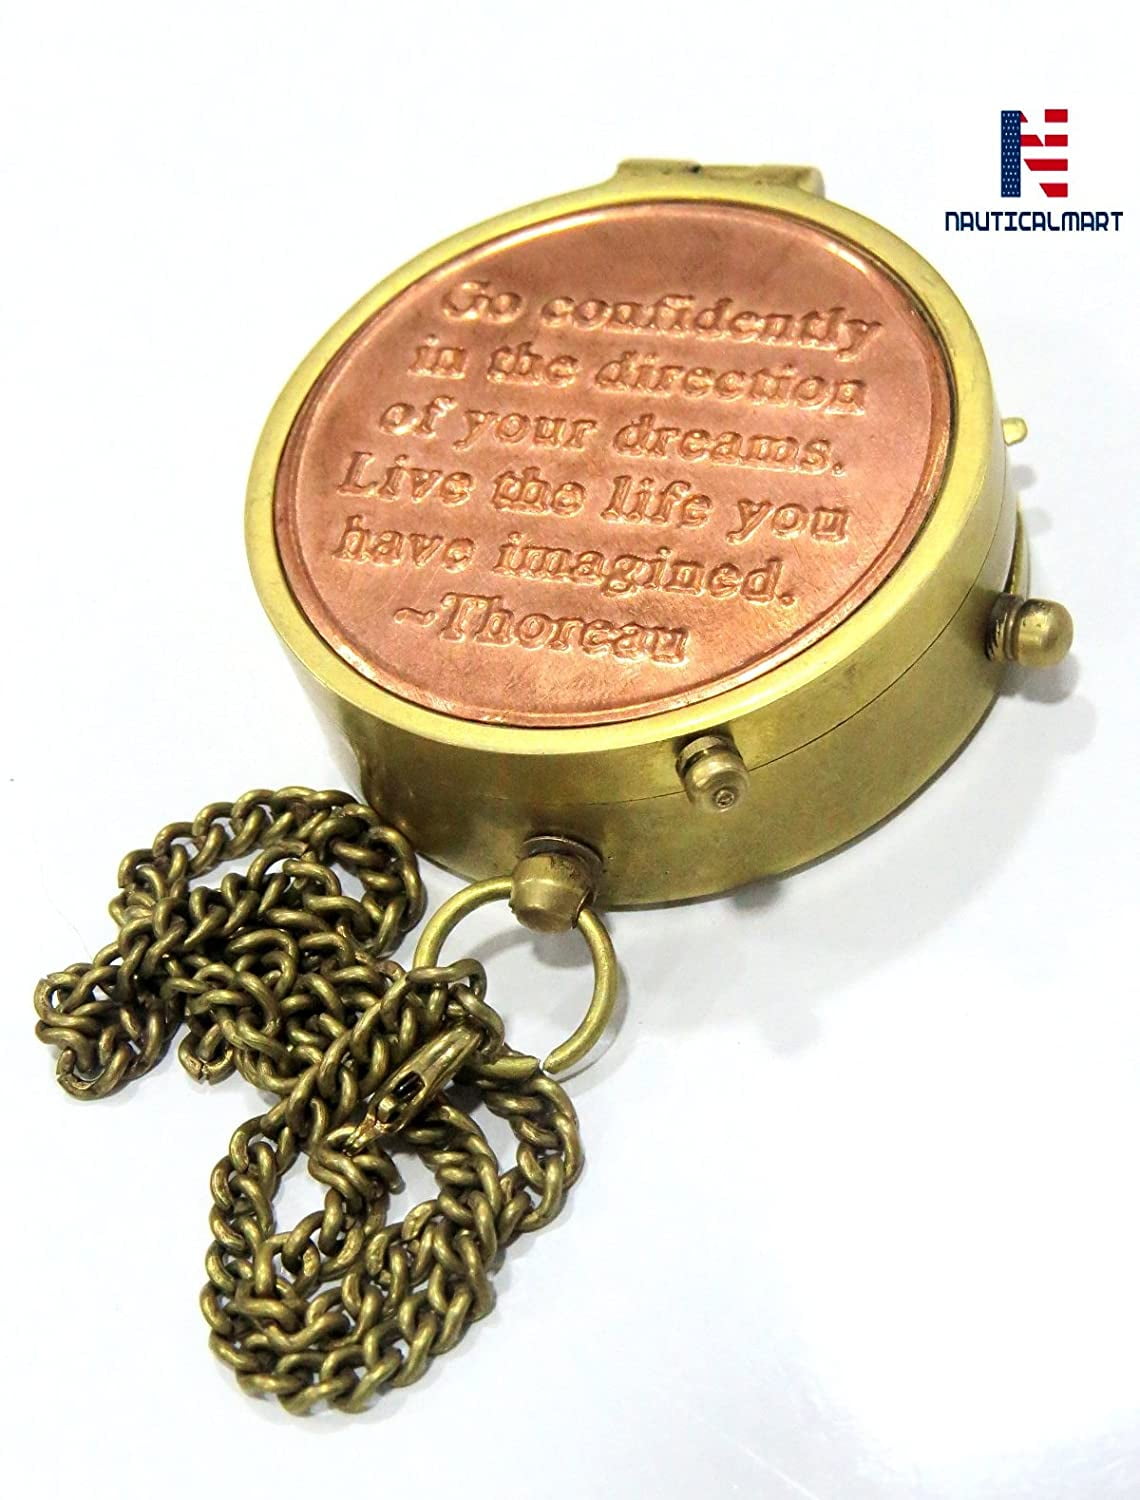 NauticalMart Brass Compass Thoreaus Go Confidently Quote Engraved with Stamped Leather case 